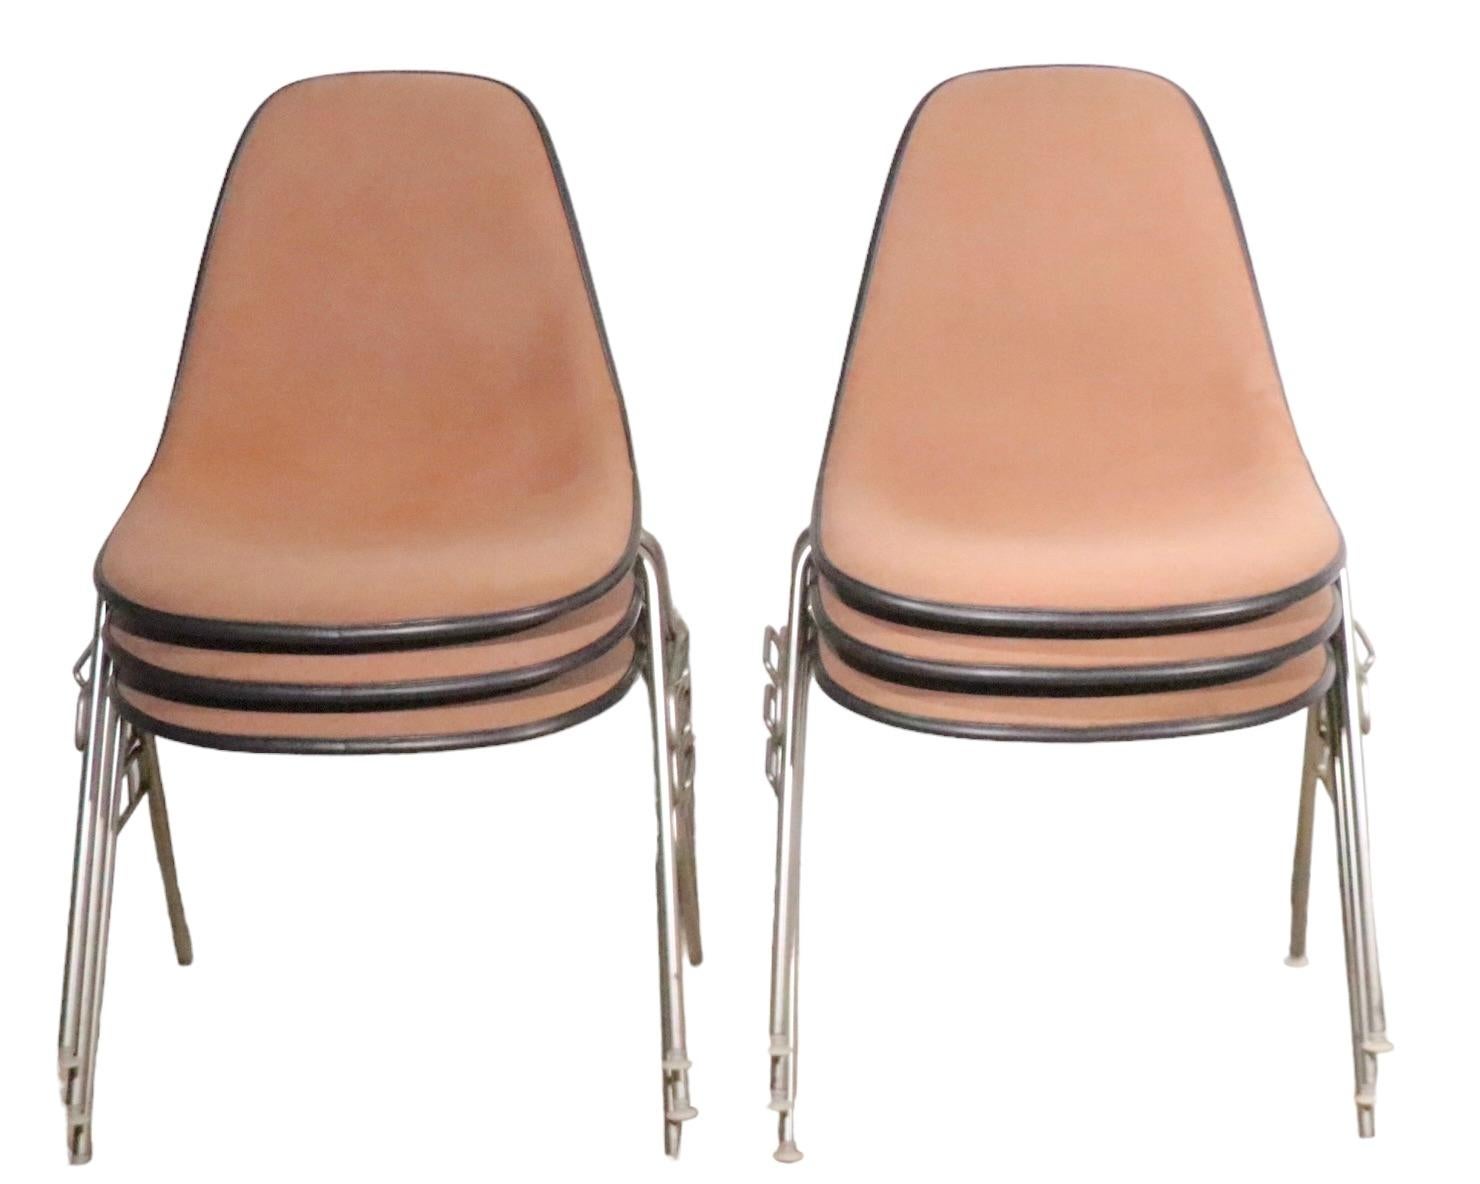 Set of six stacking DSS chairs, designed by Eames, for Herman Miller, having beige/ clay colored tweed upholstery,   dark gray fiberglass shells, and metal legs. All are in very good original condition showing only light cosmetic wear normal and